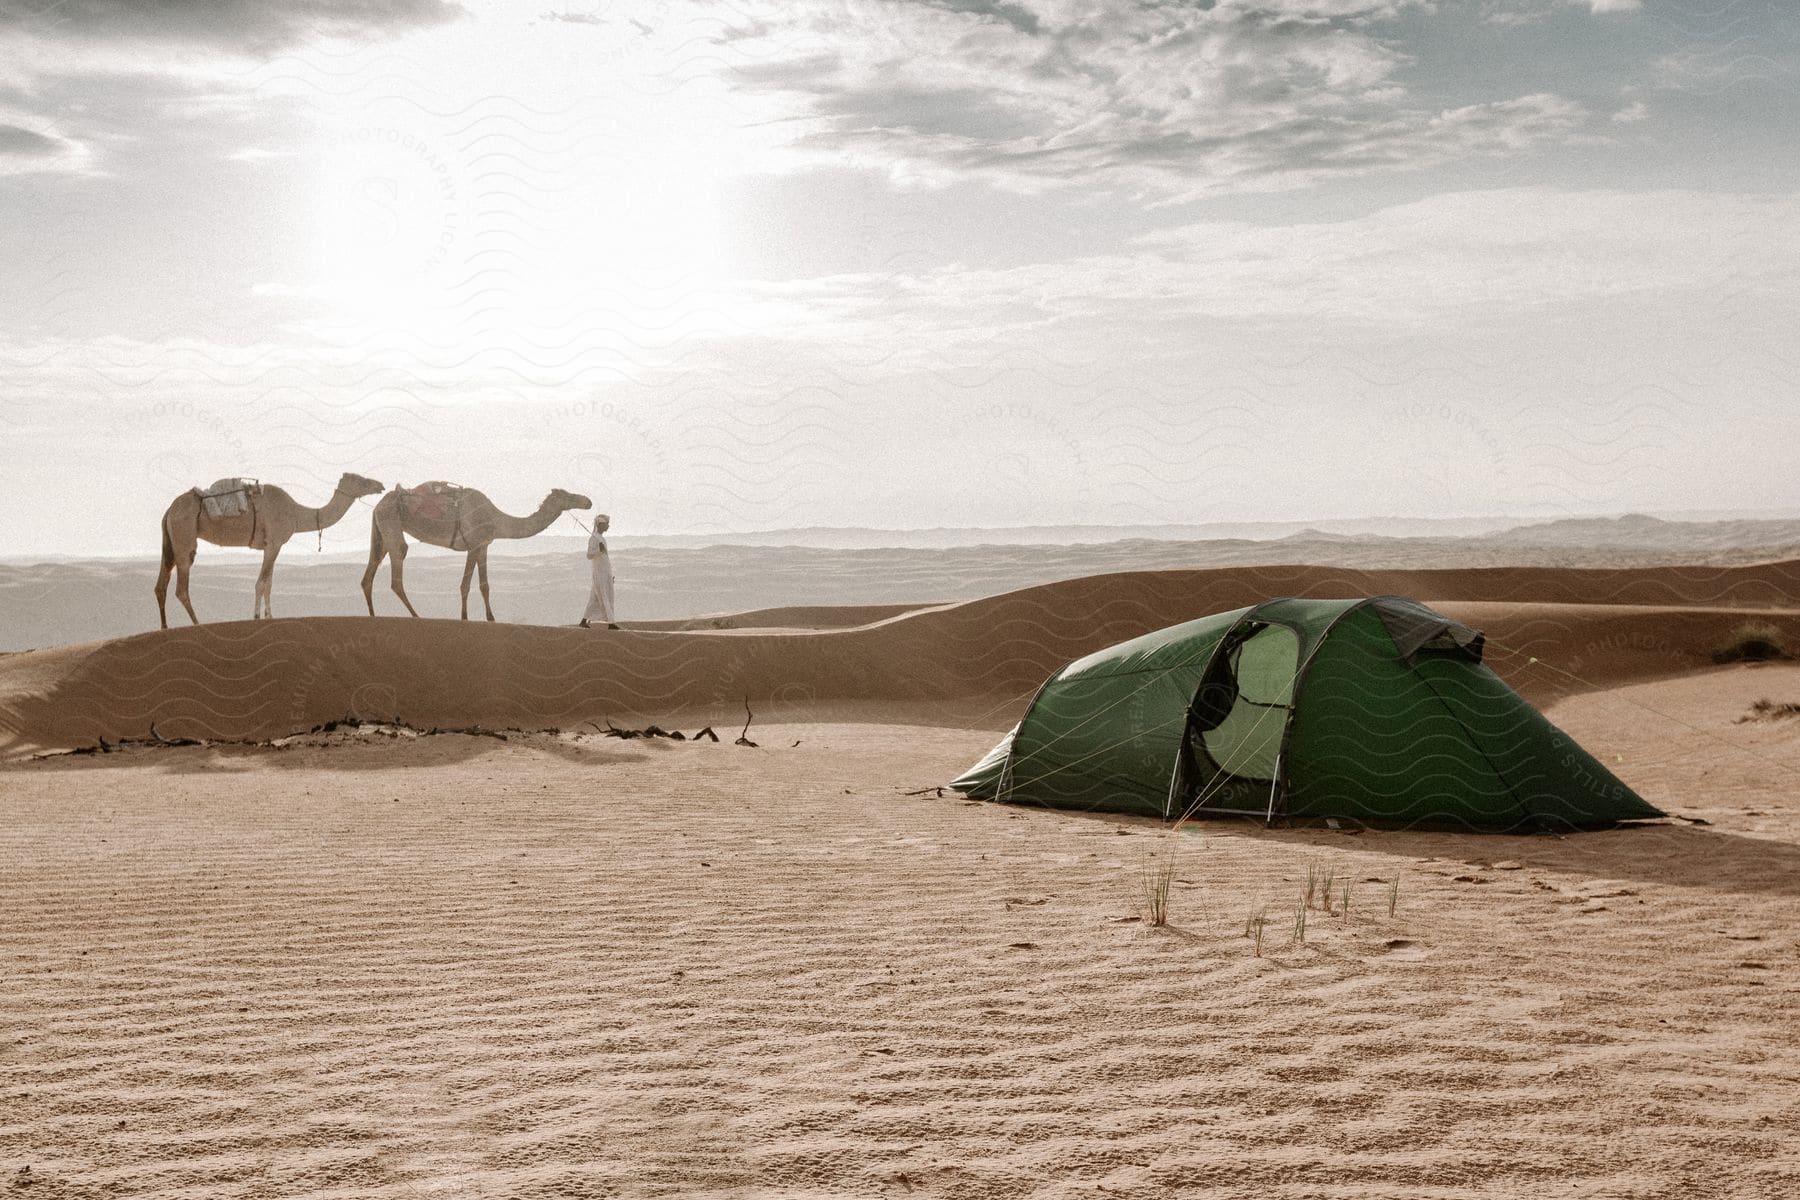 A man with two camels stands in a deserted landscape near a green tent